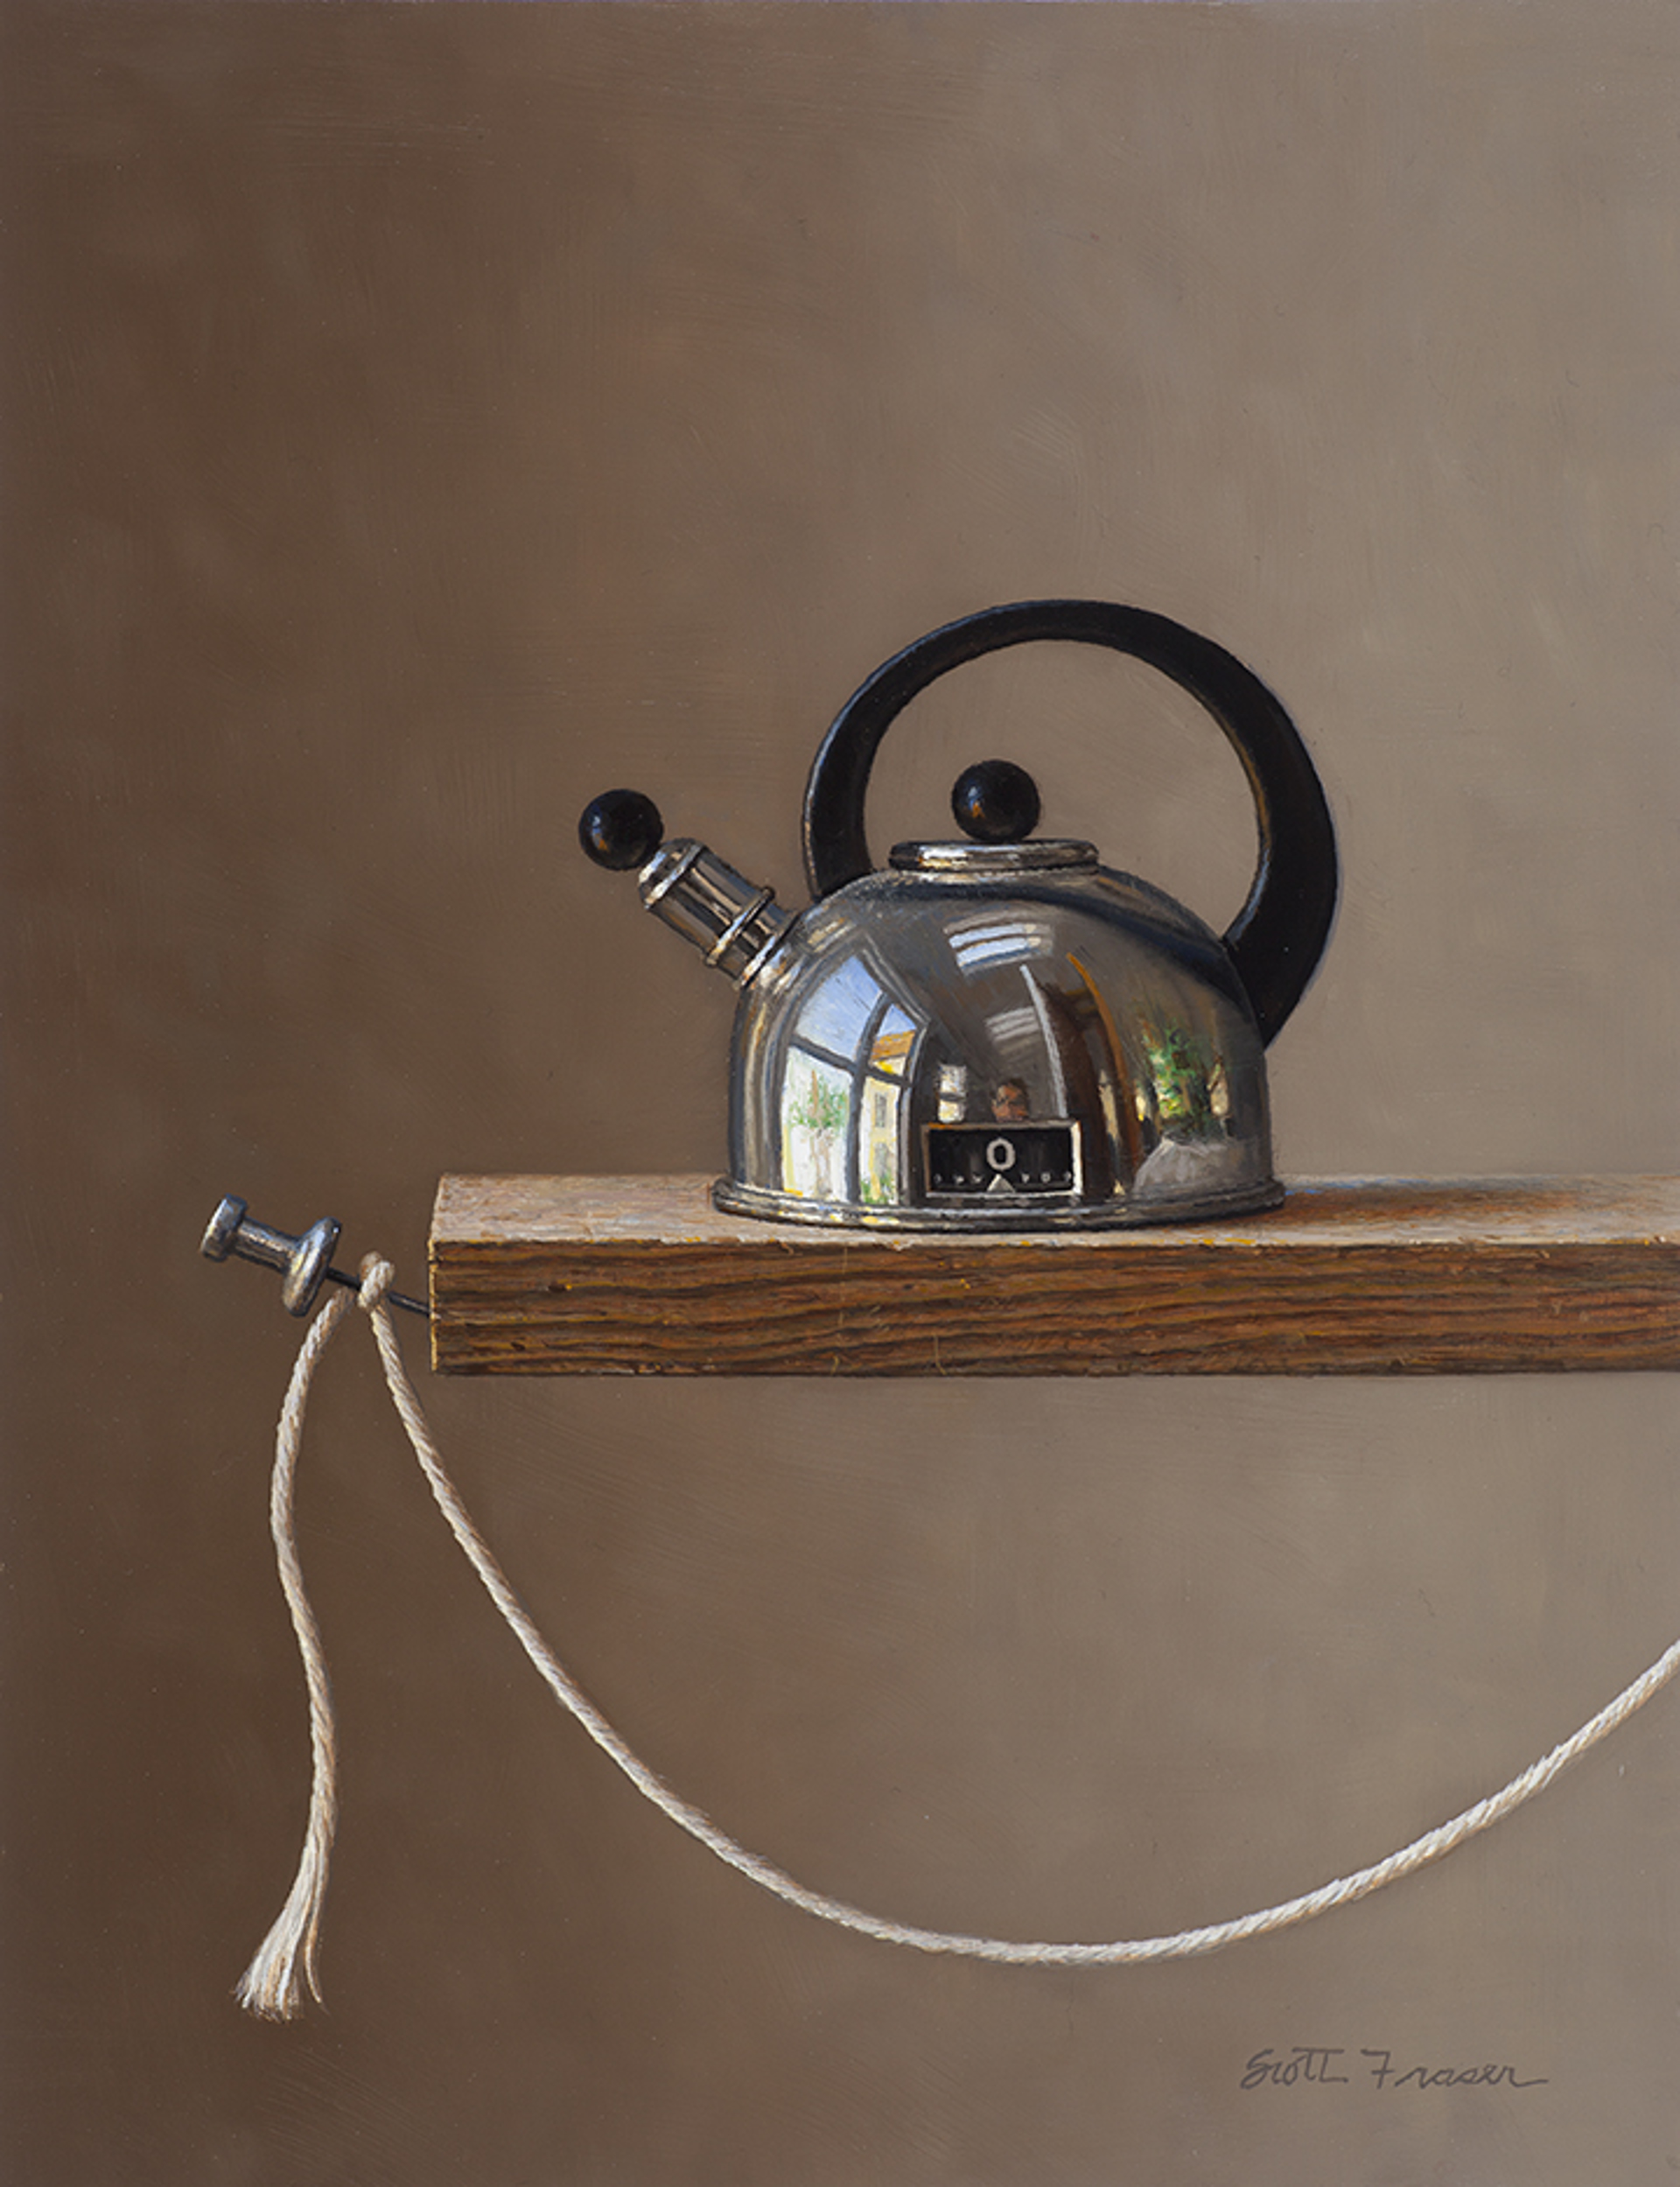 Teapot with String by Scott Fraser